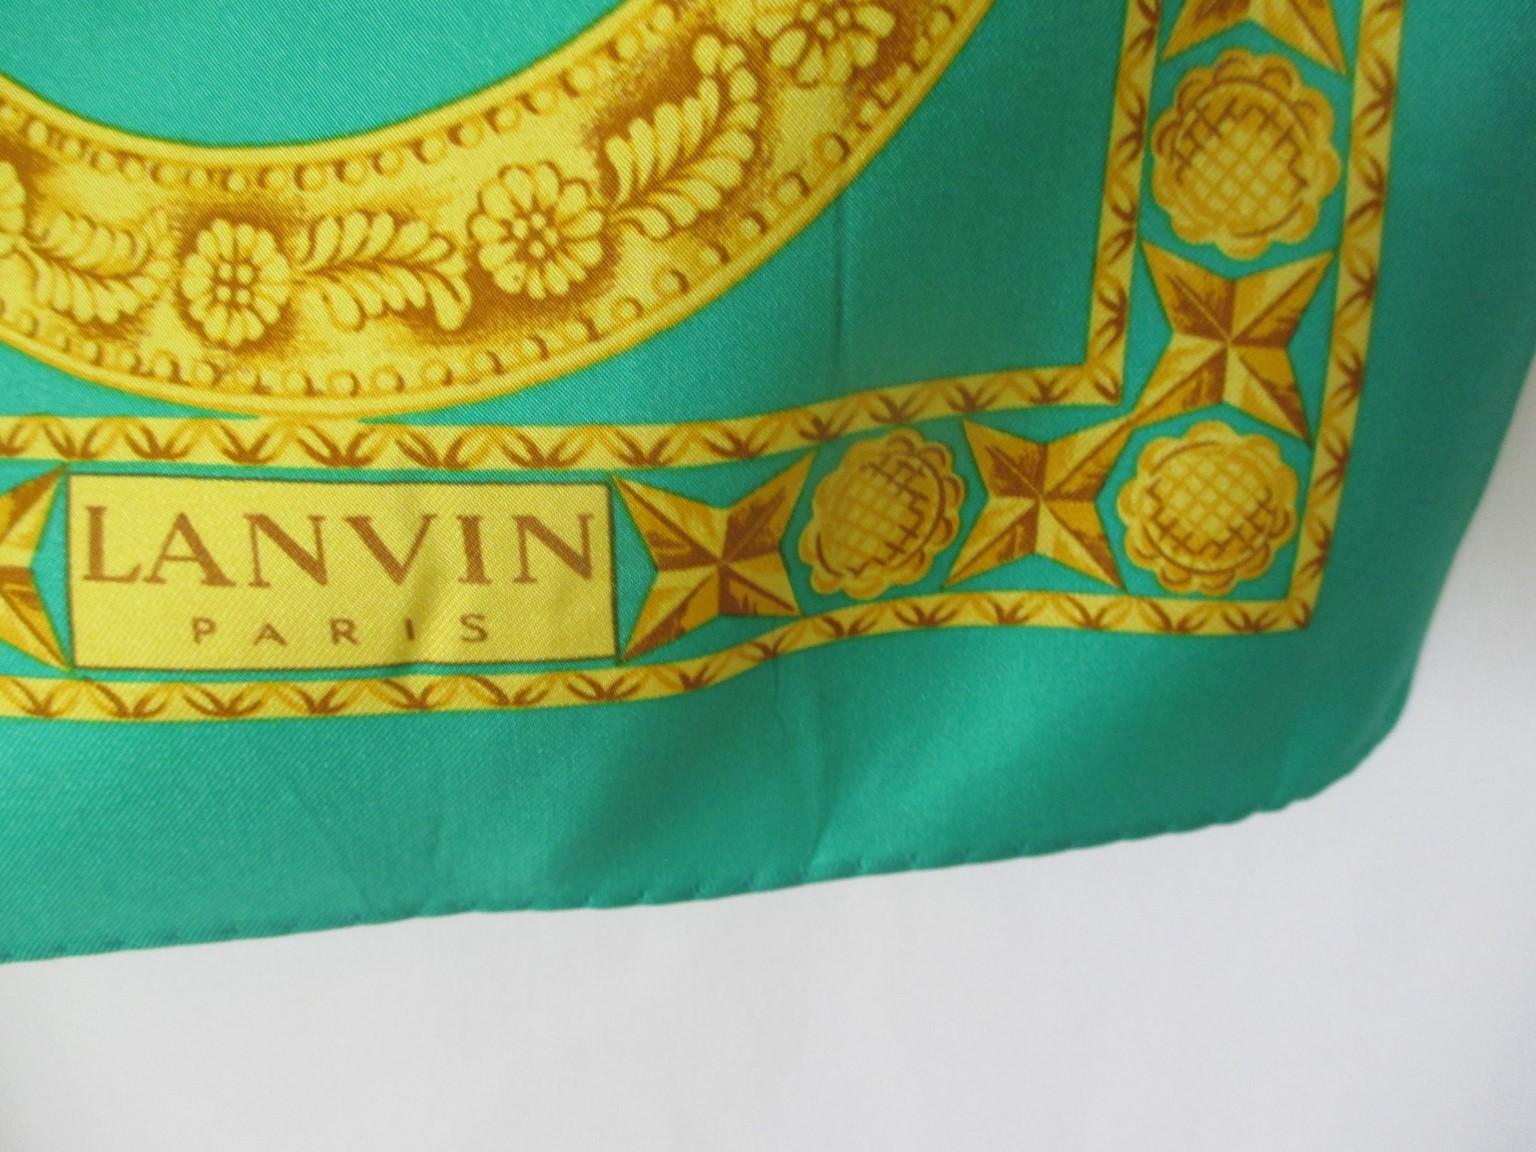 We offer more vintage Hermes, Cartier scarfs, view our frontstore

This vintage Lanvin scarf is a true collector's silk scarf in collector's condition, one to own to wear, show or frame. 
The perfect colorway to accessorize your spring and summer